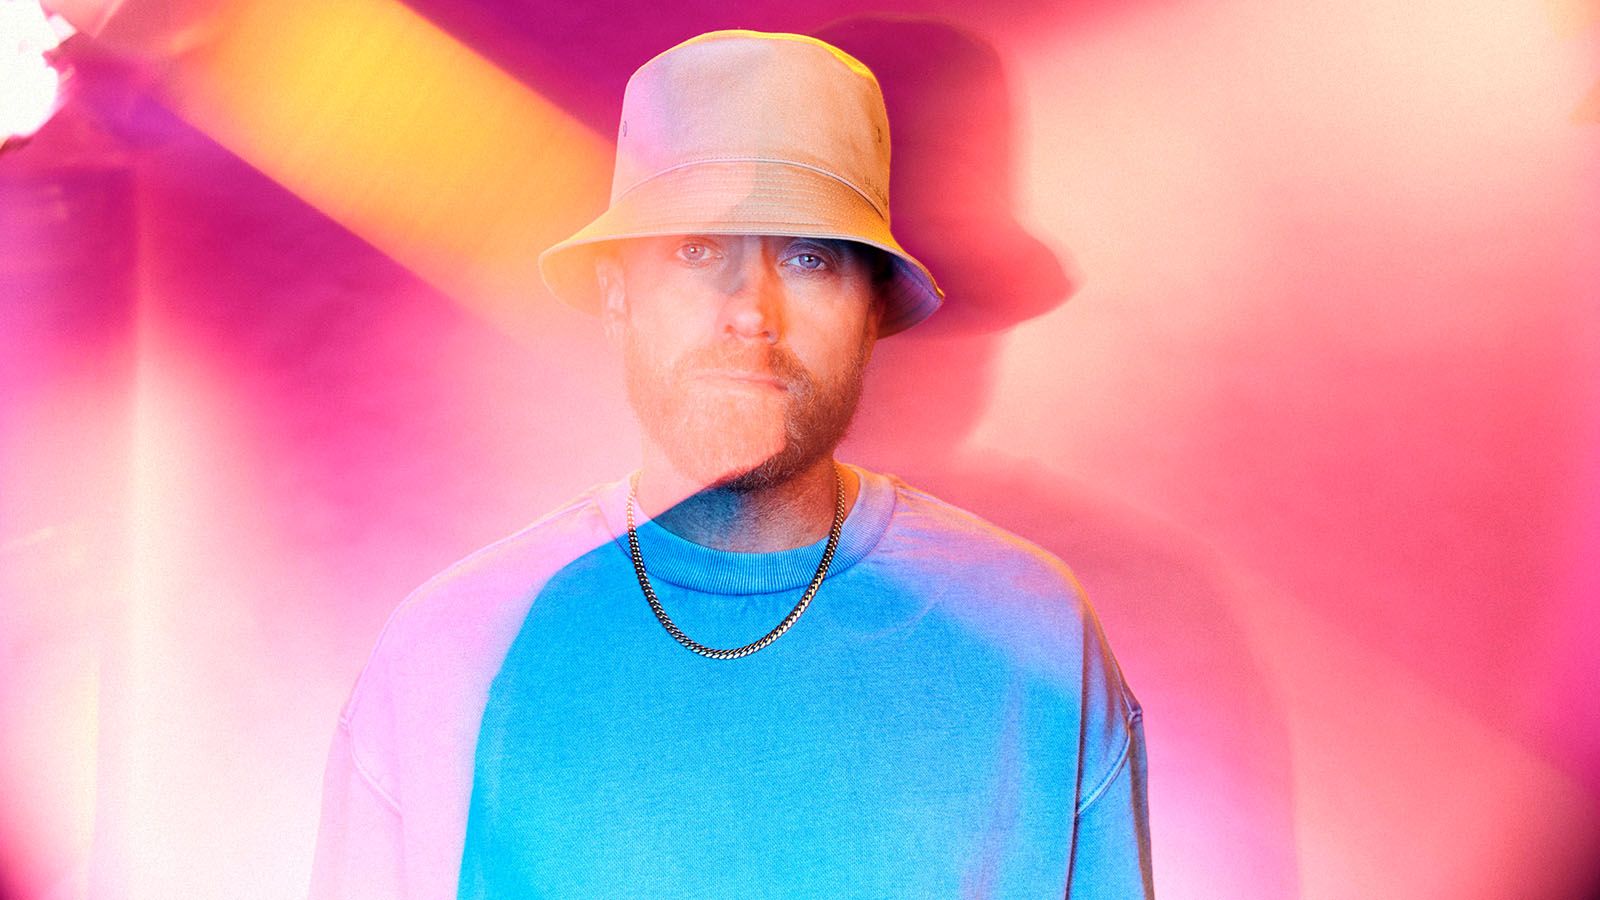 Christian artist TobyMac will be joined by MercyMe and Zach Williams on Friday, Nov. 17, at Memorial Coliseum.